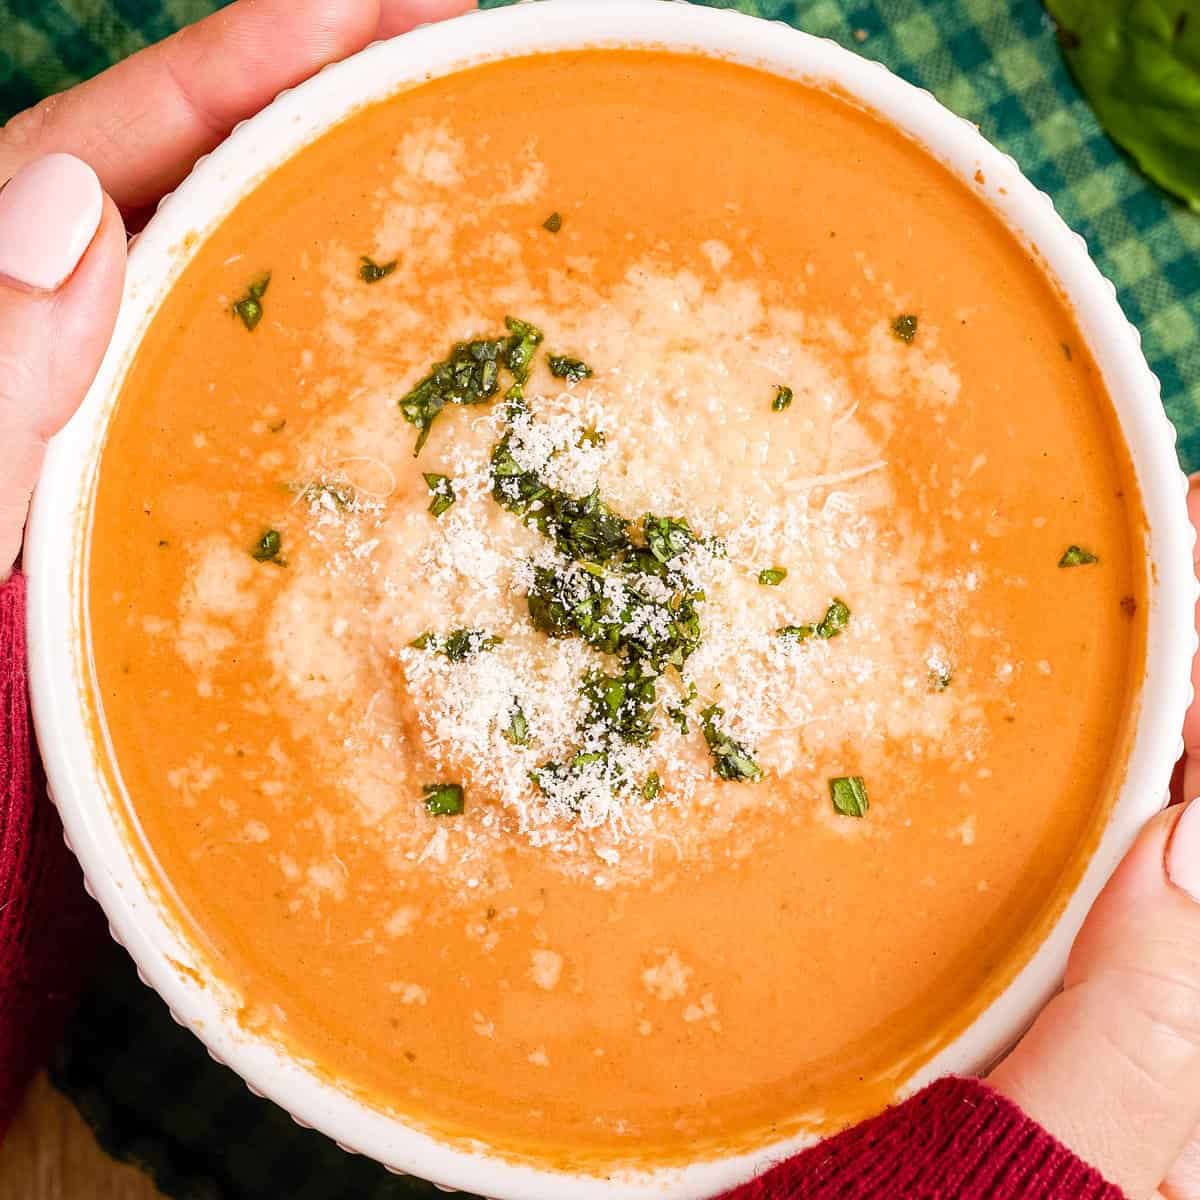 https://www.thechunkychef.com/wp-content/uploads/2022/01/Creamy-Tomato-Basil-Soup-recipe-card.jpg